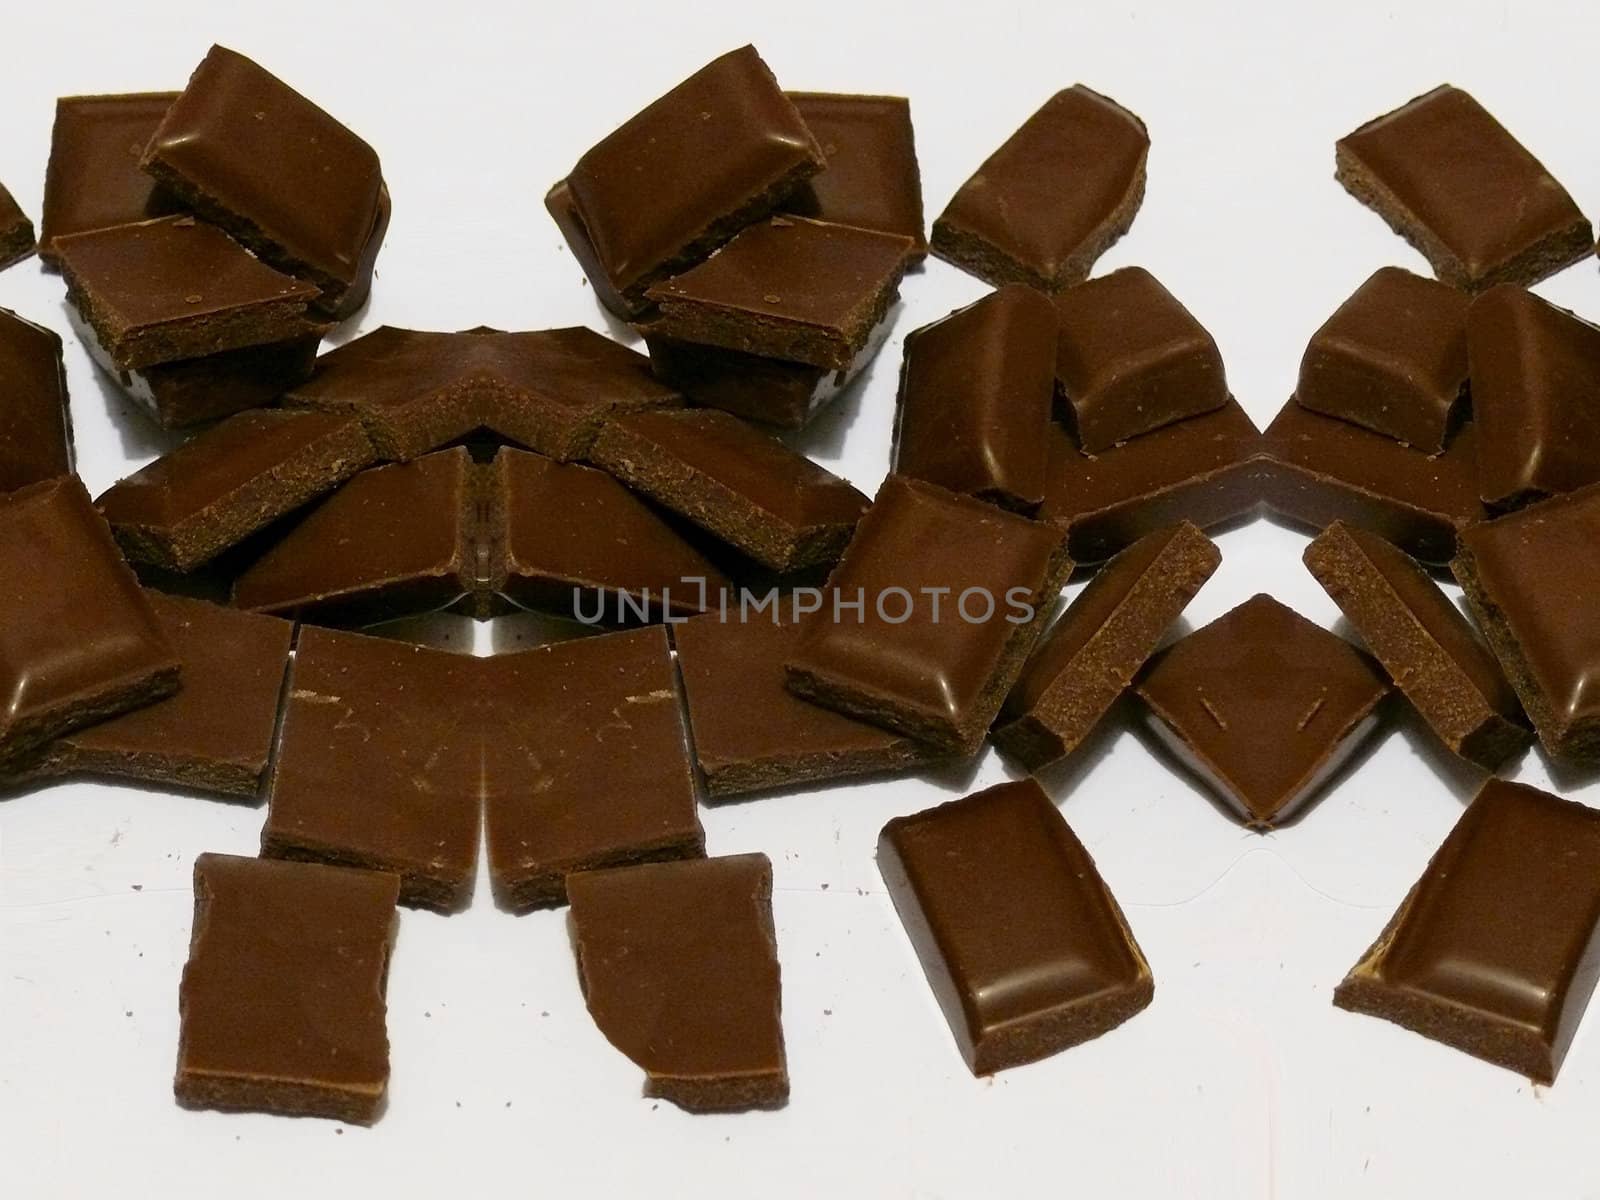 break bar of chocolate isolated on a white background